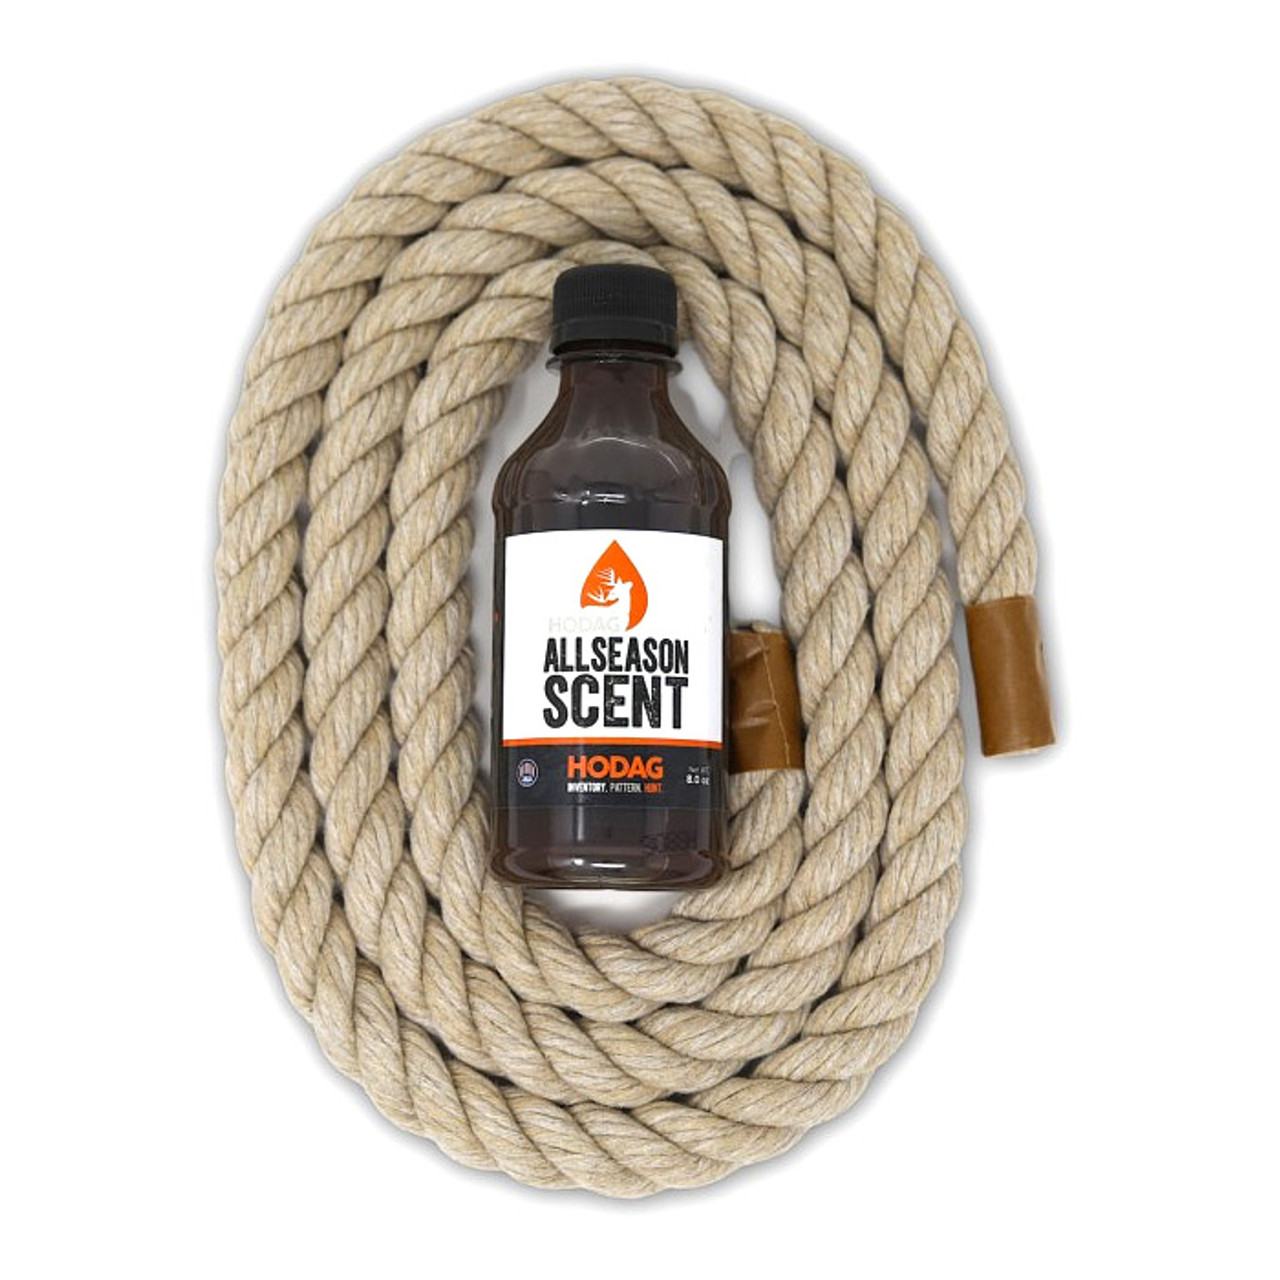 HempScent Rope Scent System by Hodag